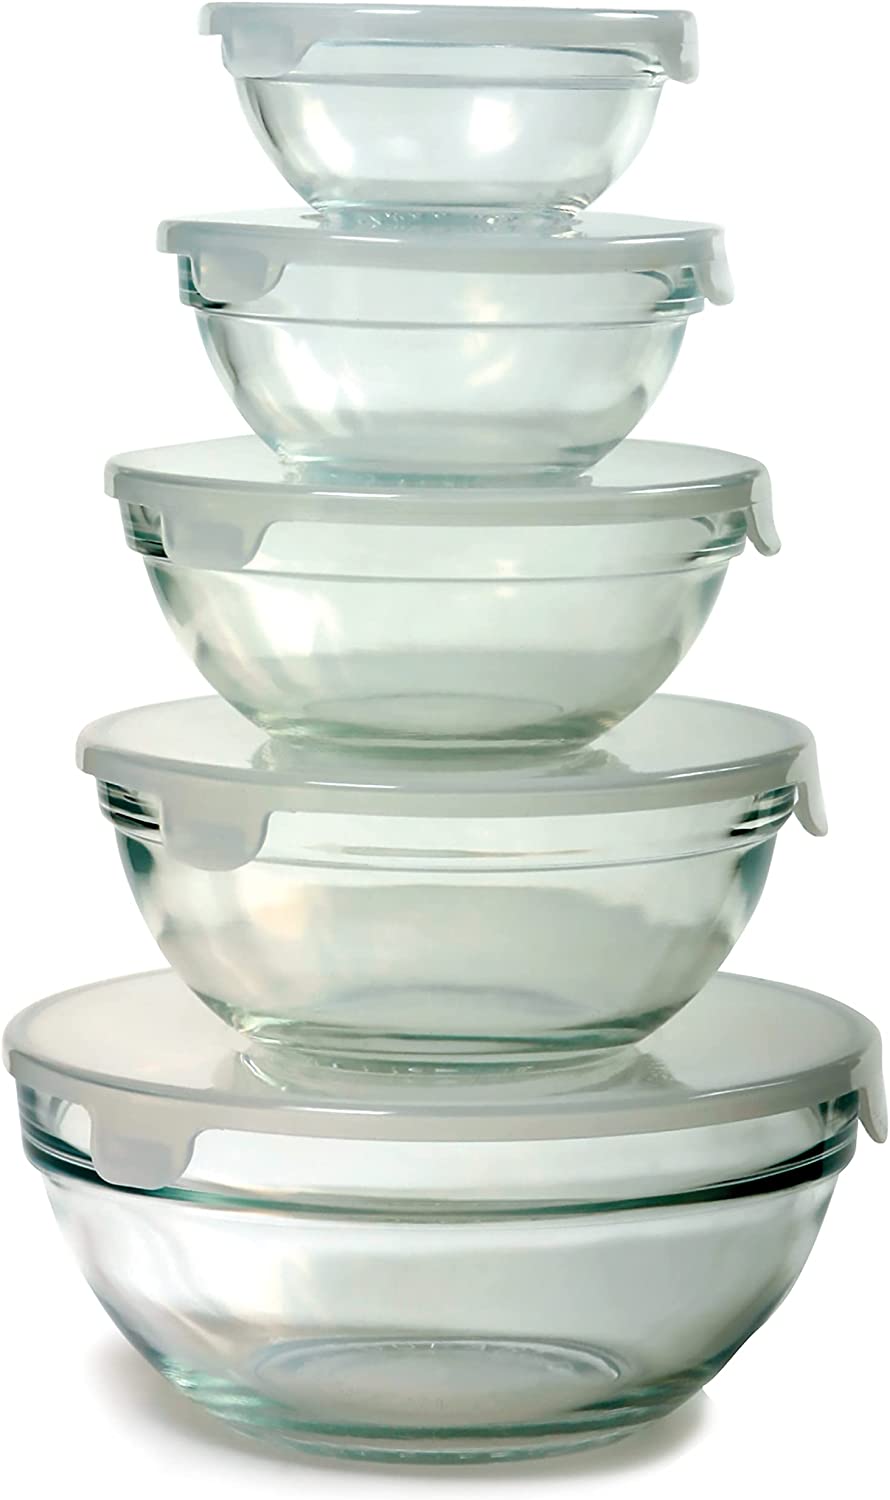 Round Glass Prep & Store Bowls with Snap Lids - Set of 3